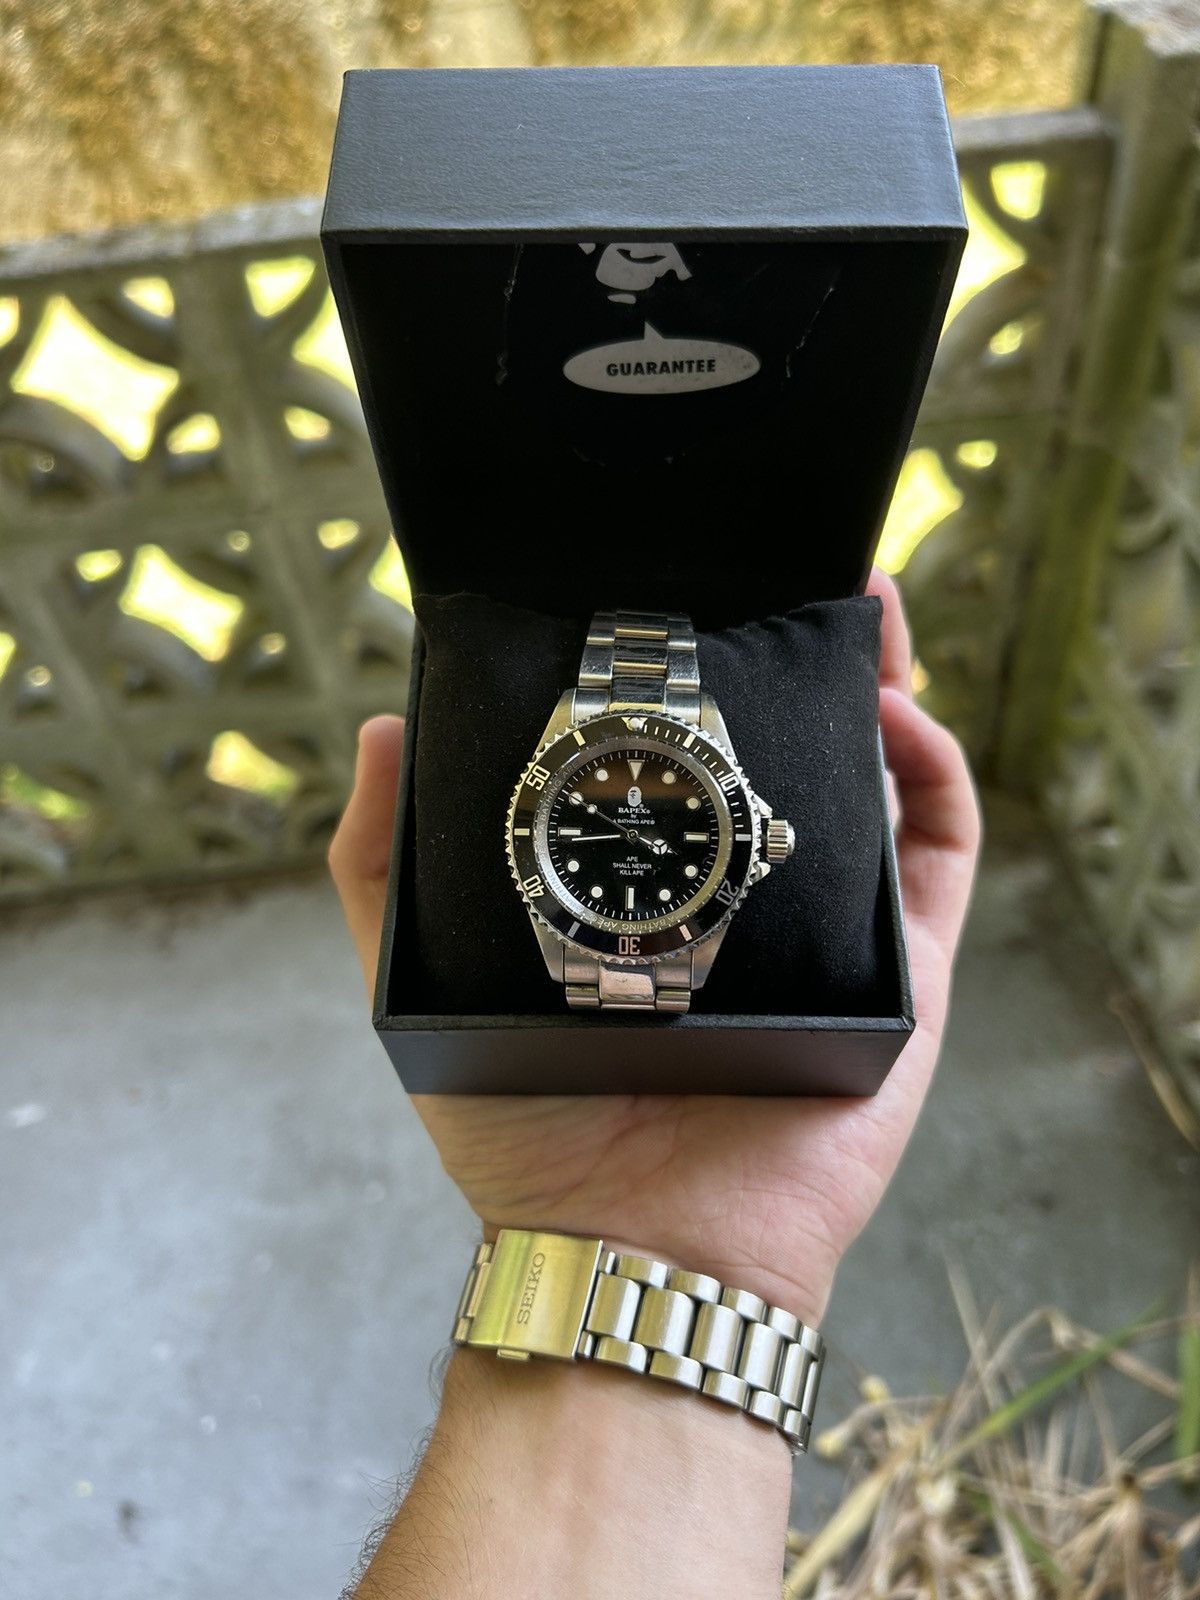 Bape Bapex Black Submariner Type 1 with Box Automatic | Grailed